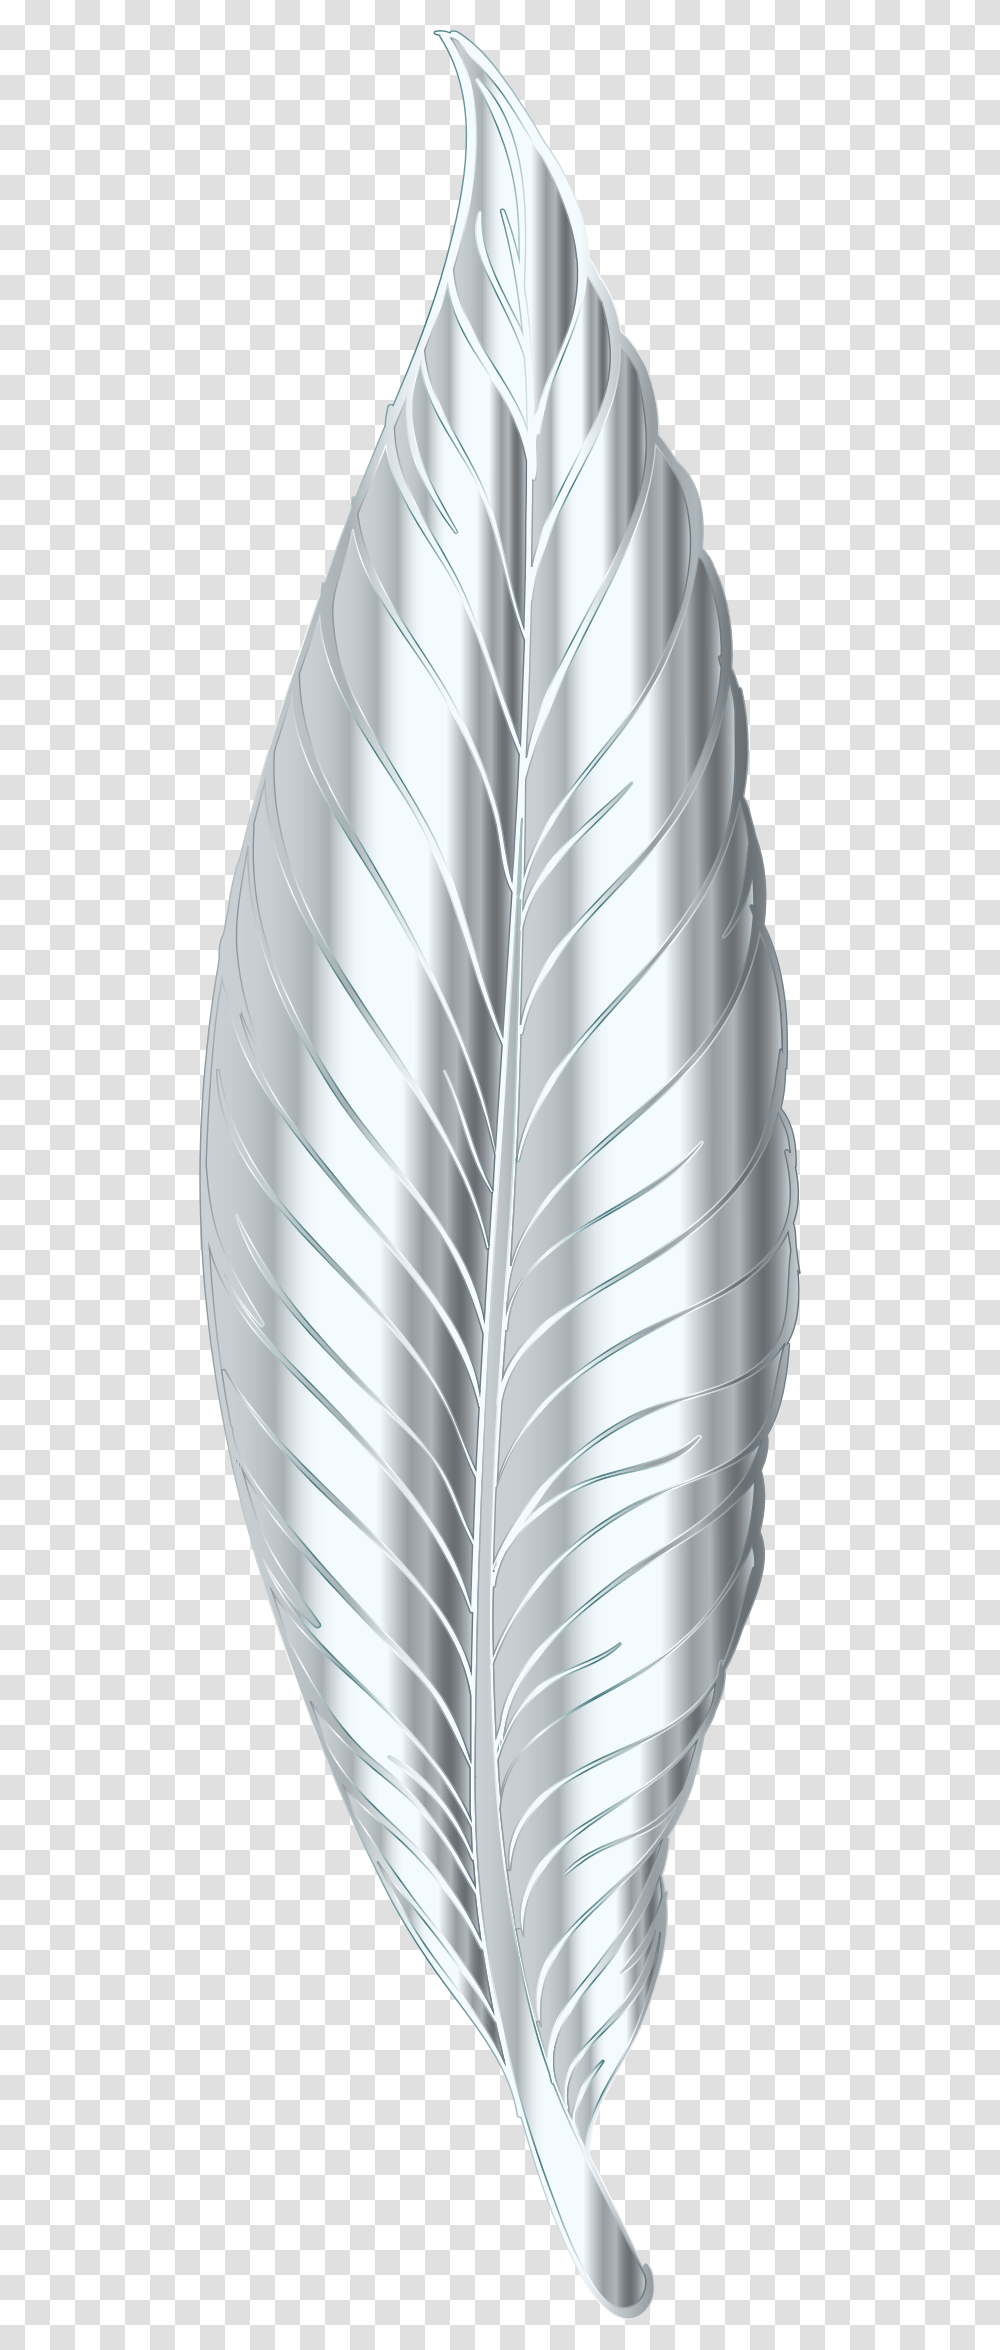 Silver Feather Clip Arts Silver Feather, Plant, Home Decor, Aluminium, Crystal Transparent Png